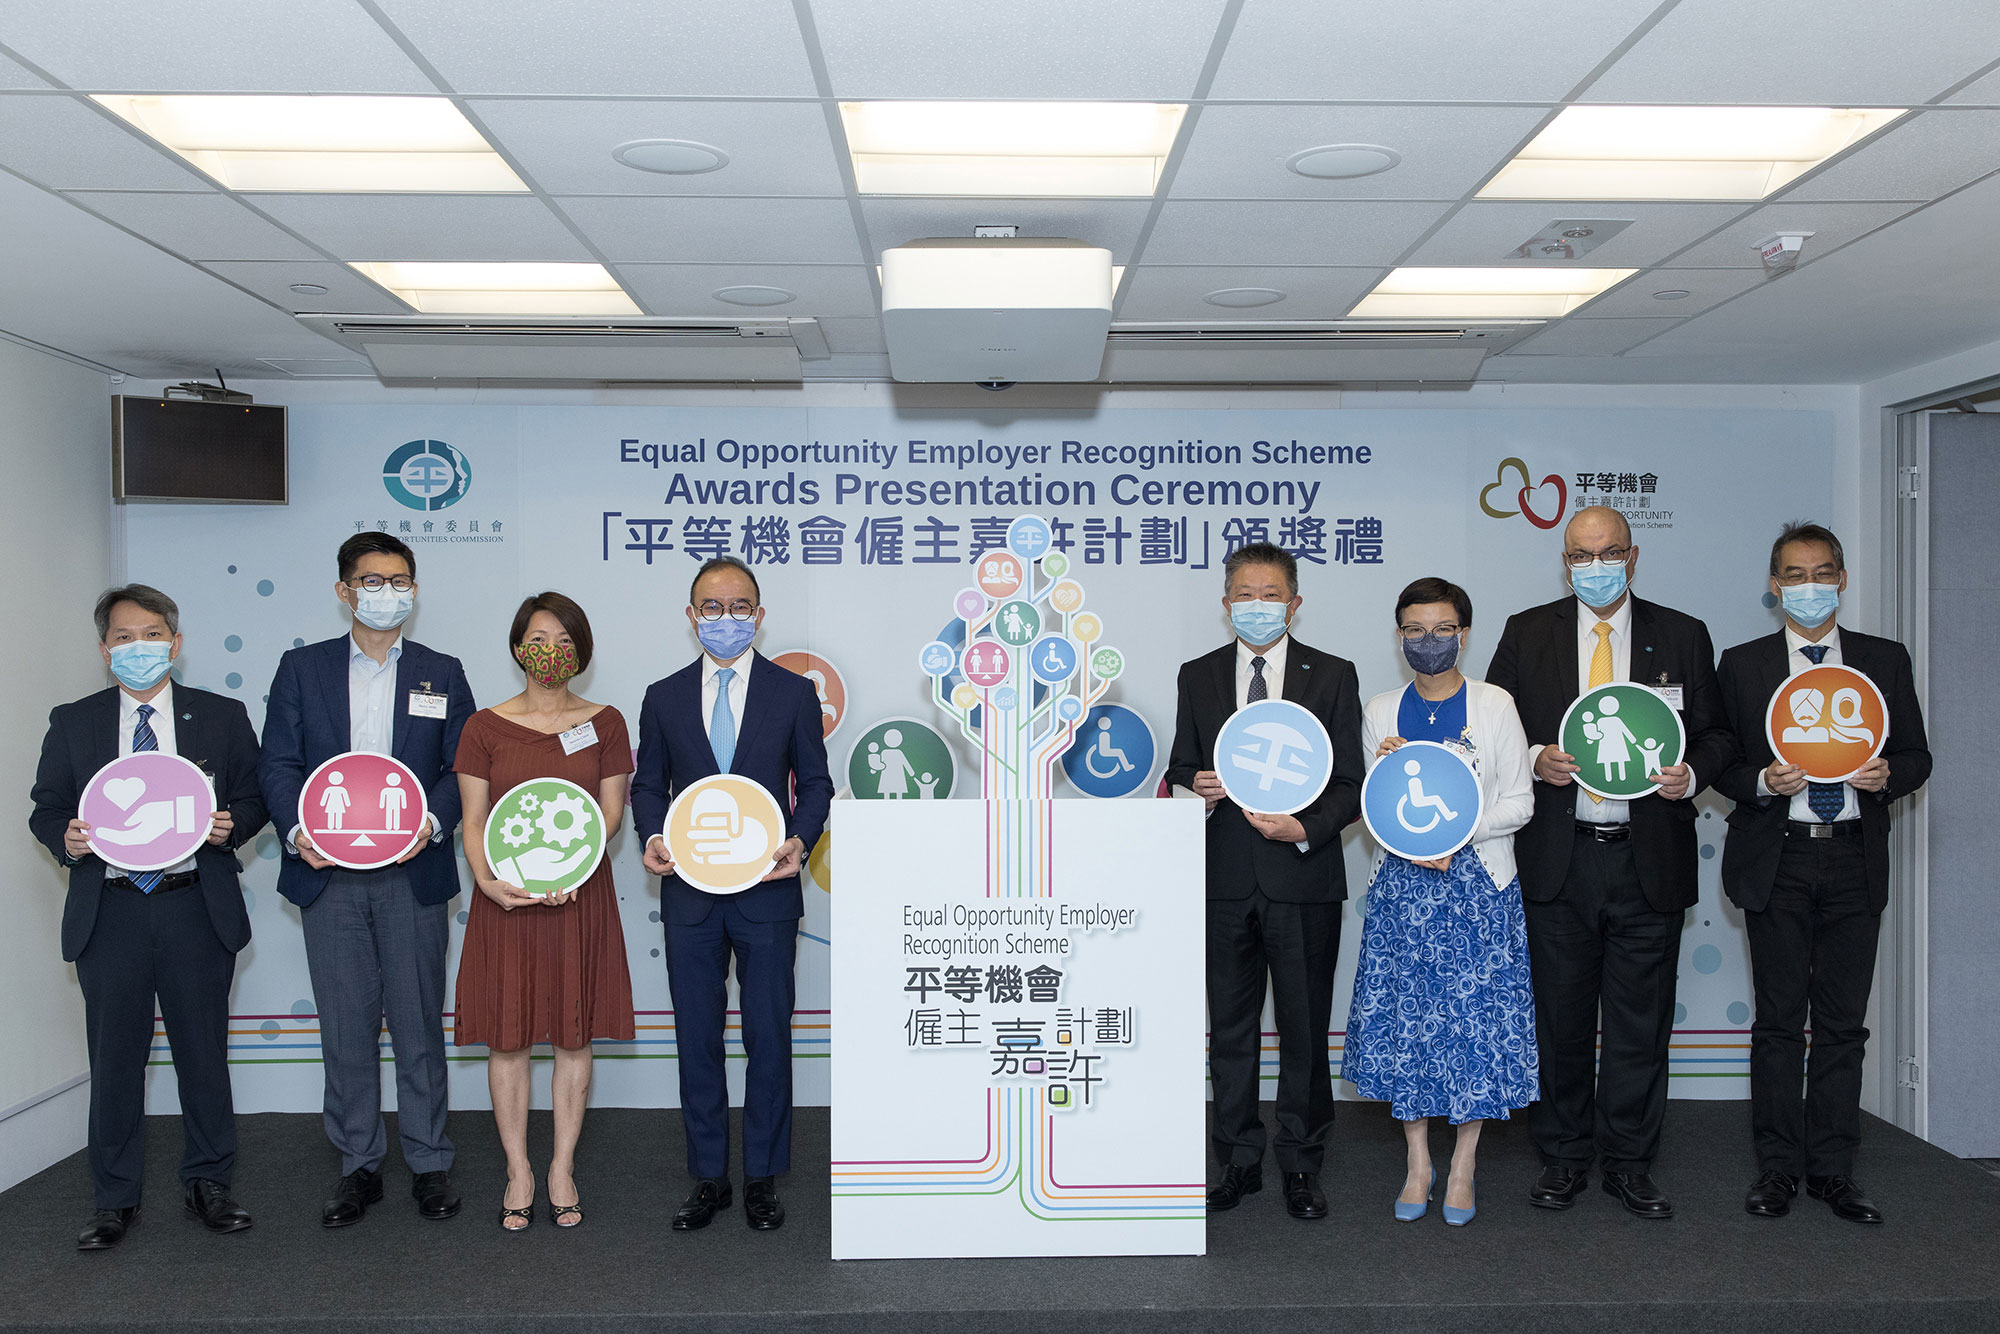 Mr Erick TSANG Kwok-wai, IDSM, JP, Secretary for Constitutional and Mainland Affairs (fourth left) and Mr Ricky CHU Man-kin, IDS, Chairperson of the EOC (fourth right) perform the ceremony with other officiating guests.